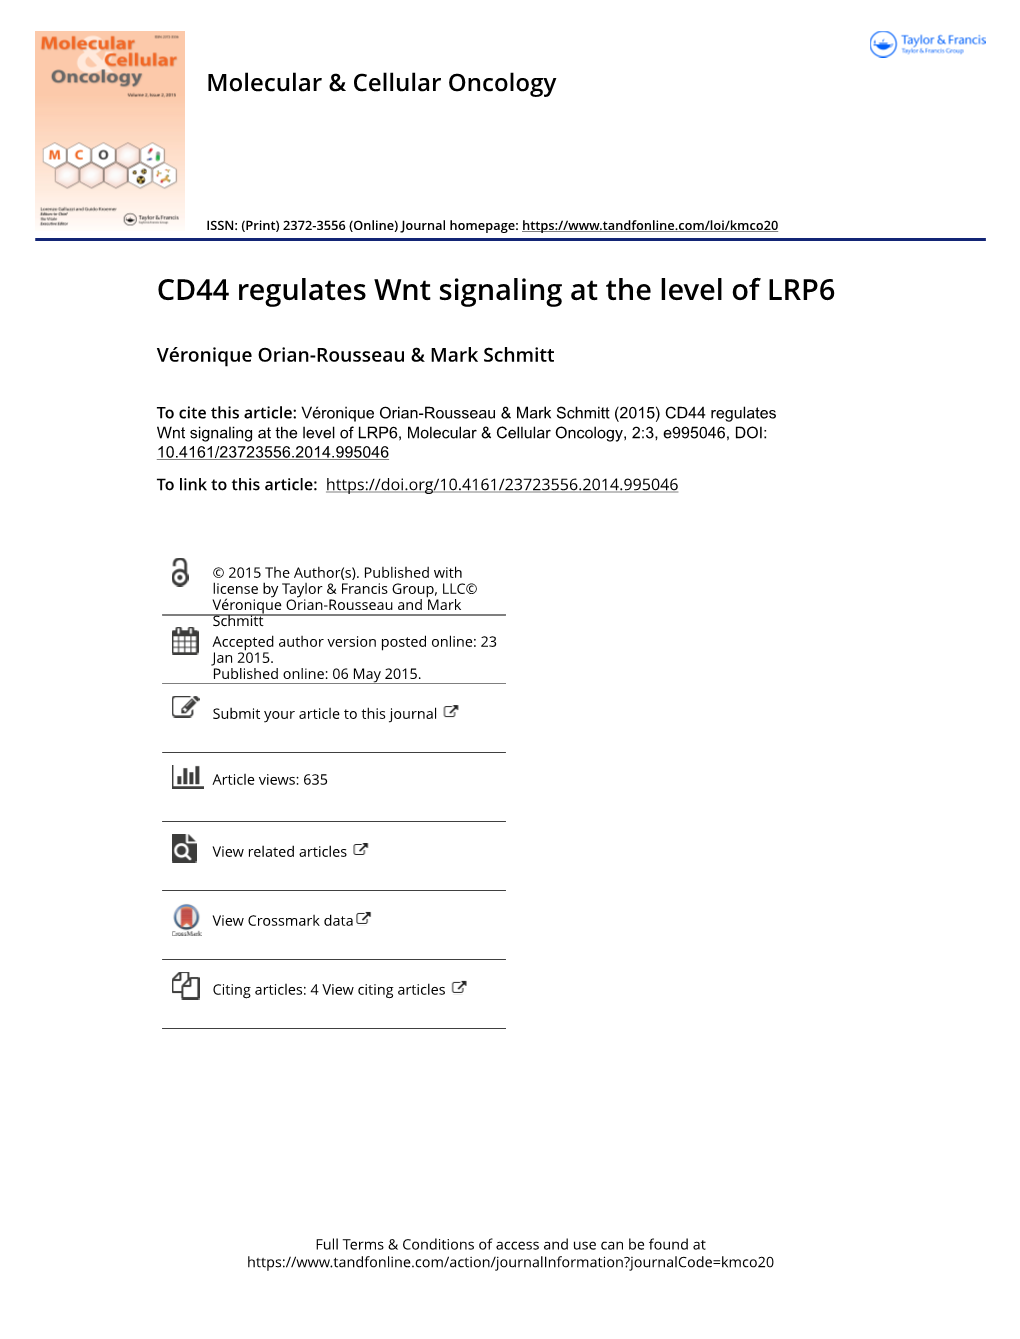 CD44 Regulates Wnt Signaling at the Level of LRP6